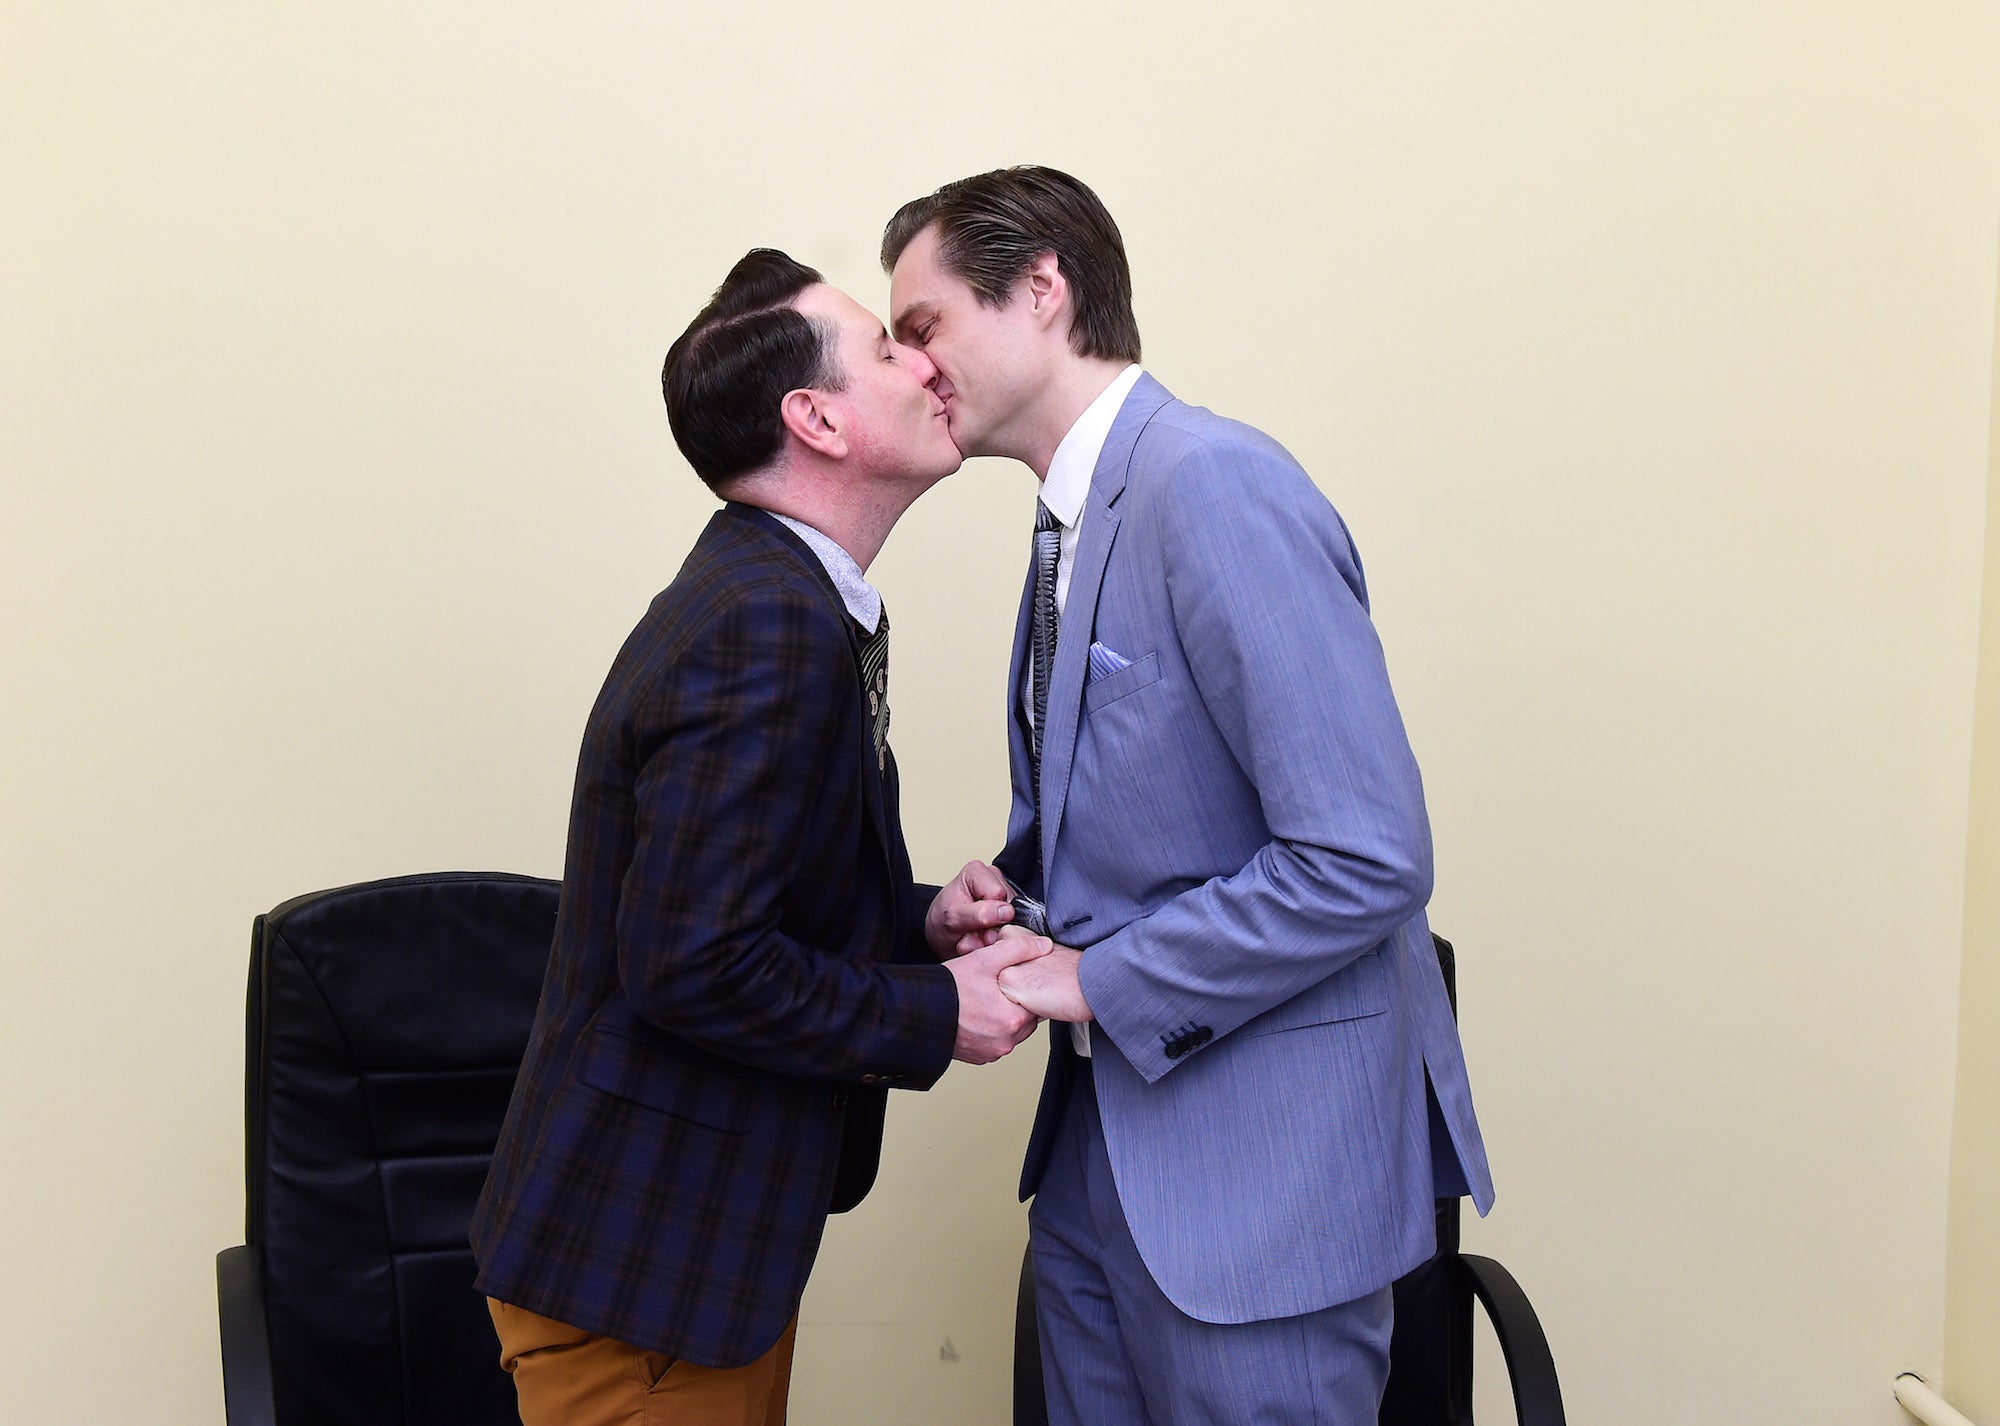 &#13;
Richard Dowling, left, and Cormac Gollogly, right, kiss after Ireland's first same-sex marriage. Charles McQuillan/Getty&#13;